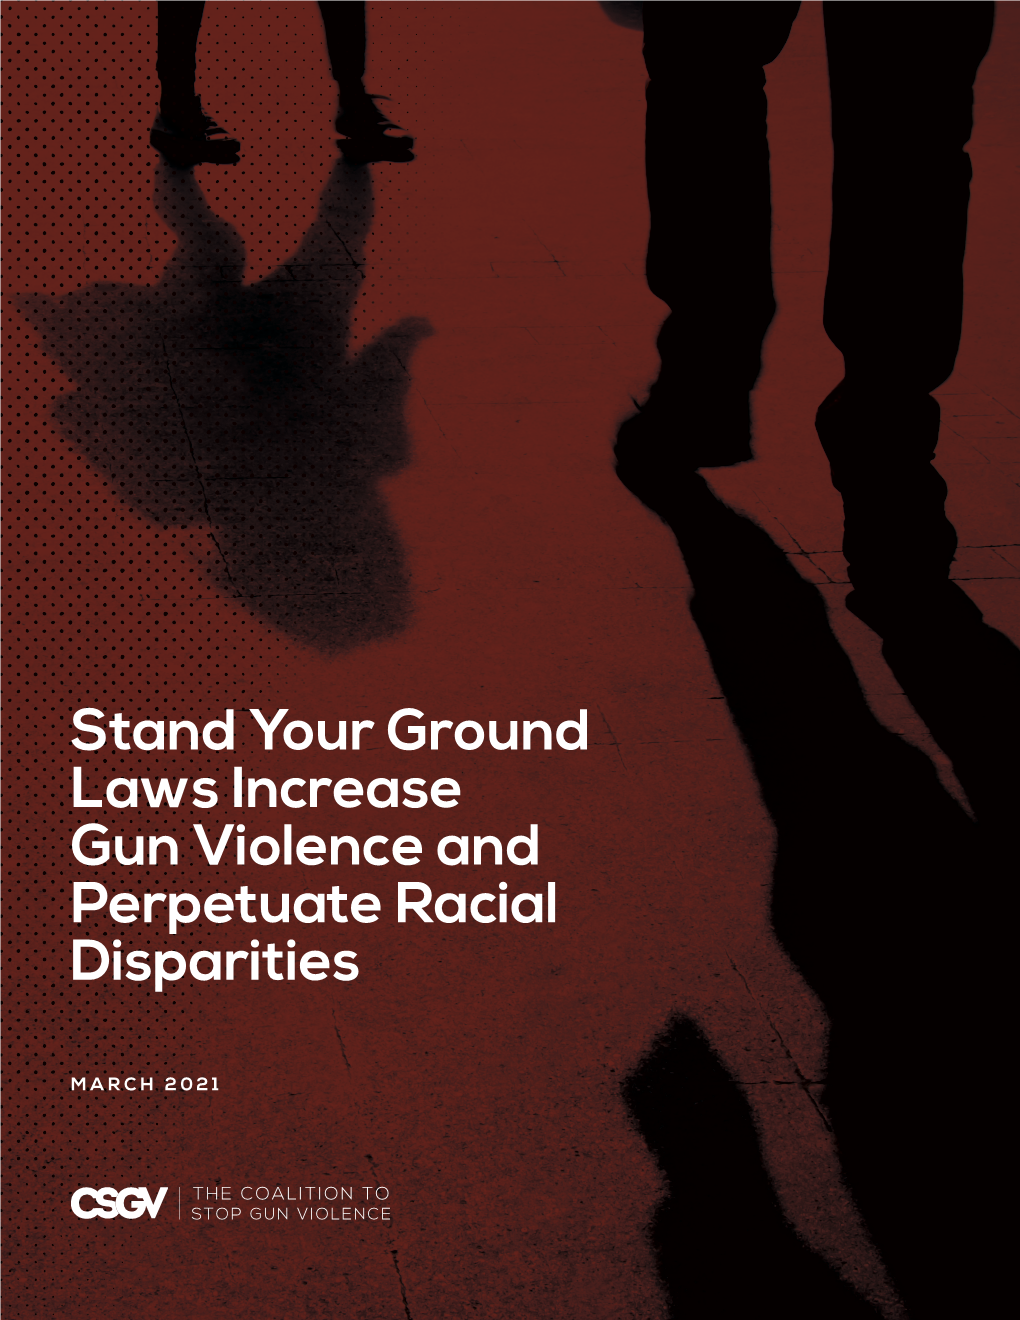 Stand Your Ground Laws Increase Gun Violence and Perpetuate Racial Disparities